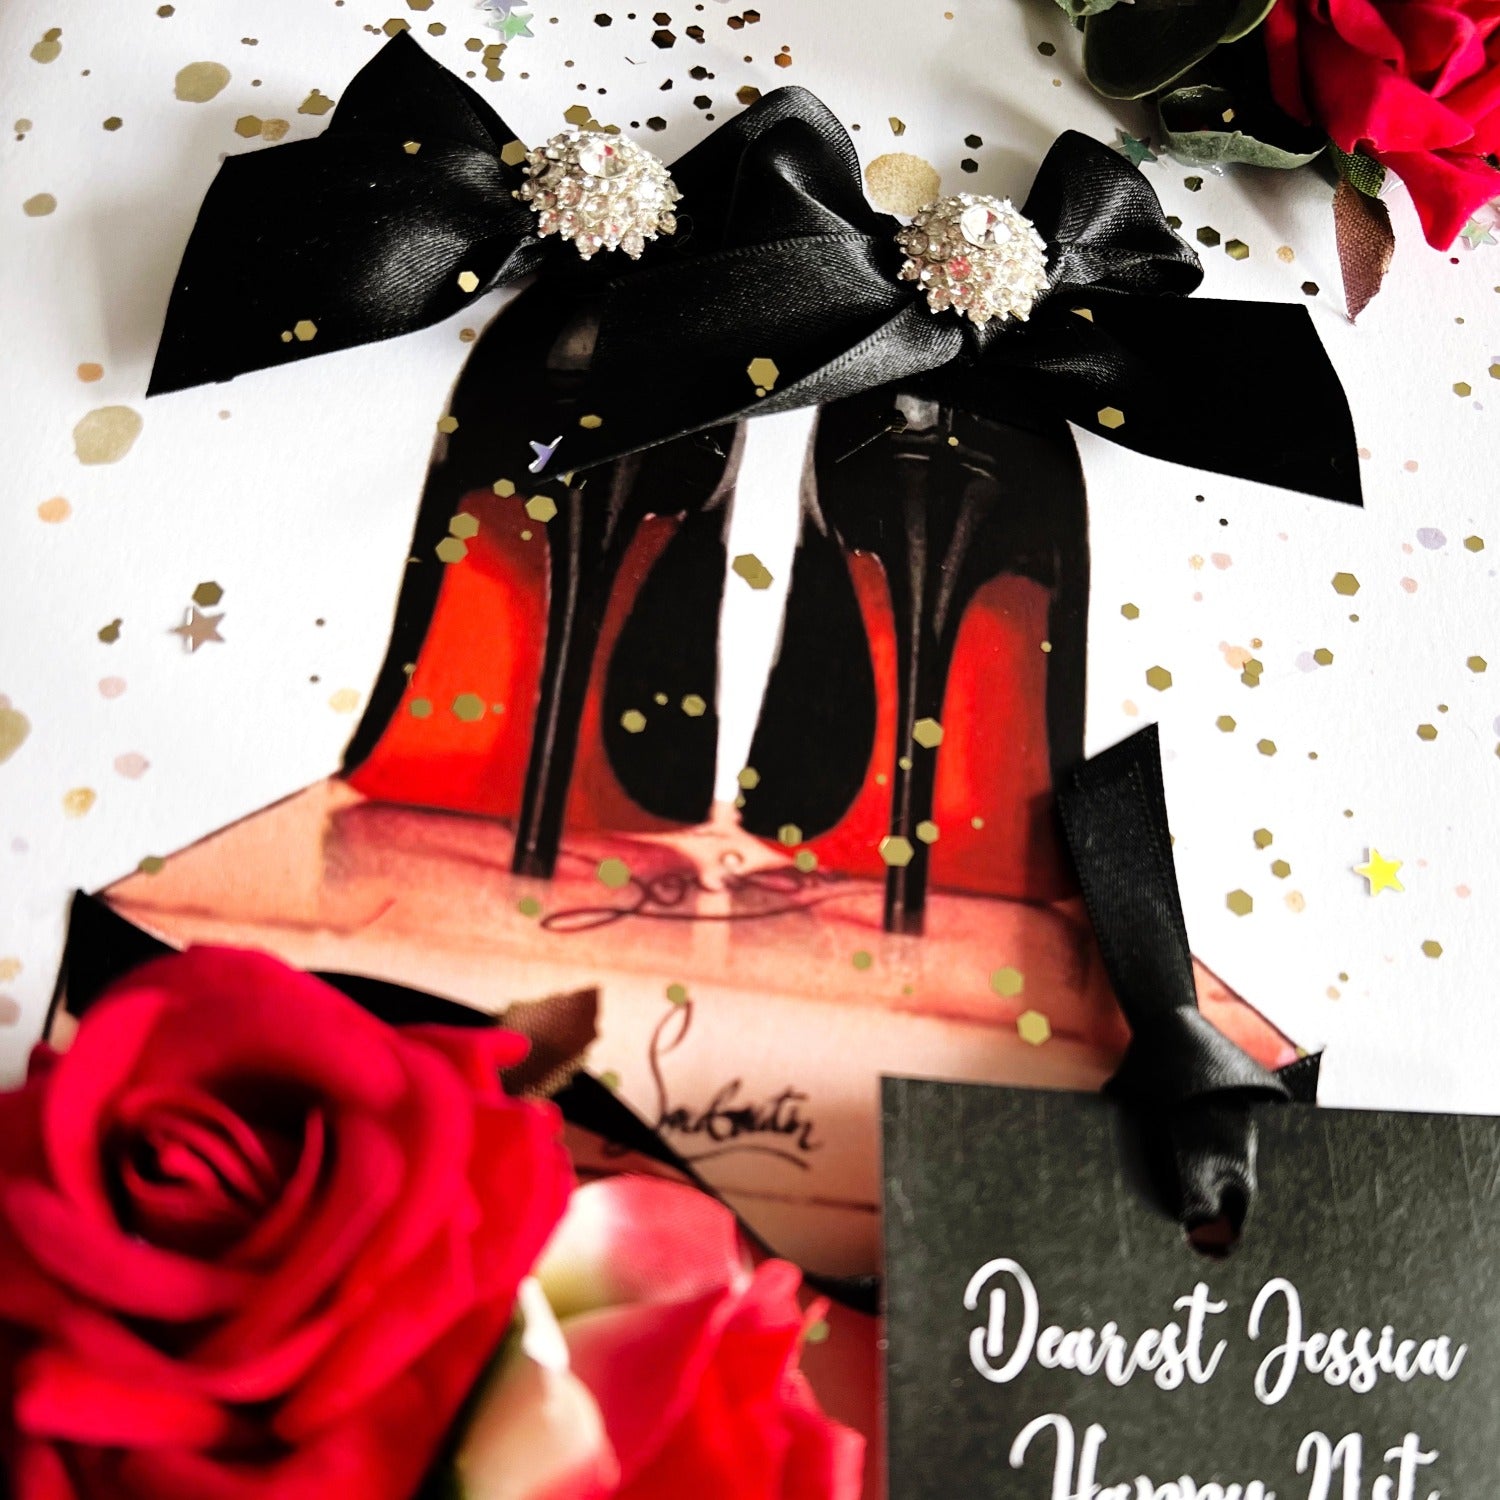 louboutin black pump heel shoes birthday card | The Luxe Co the worlds most luxurious cards